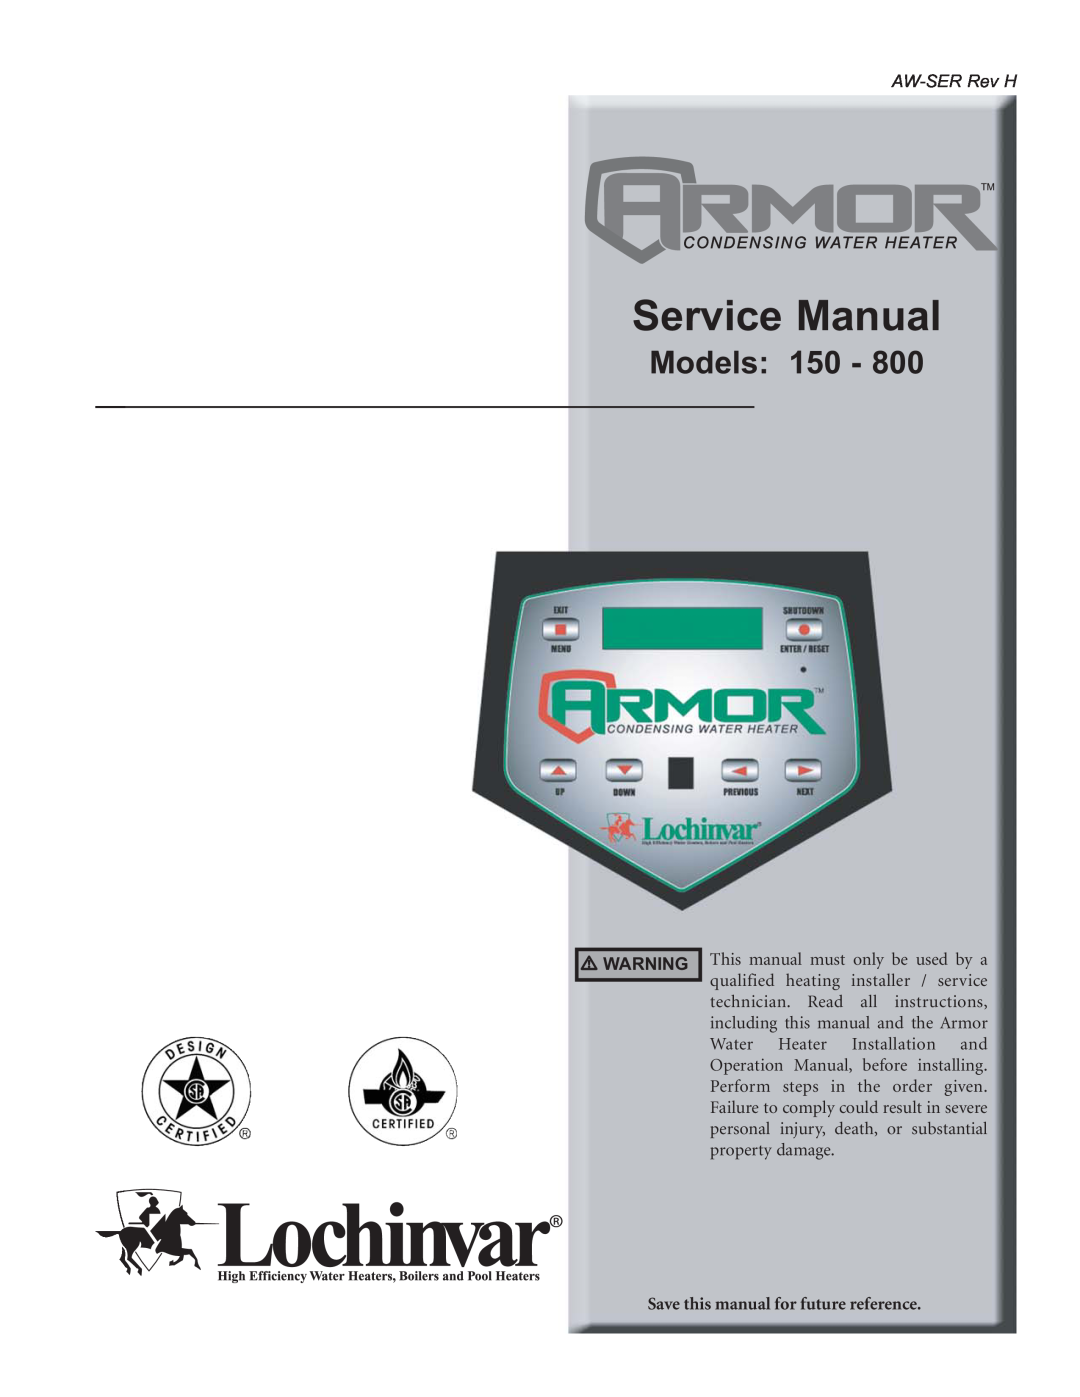 Lochinvar 150 - 800 service manual Models, AW-SERRev H, Save this manual for future reference 